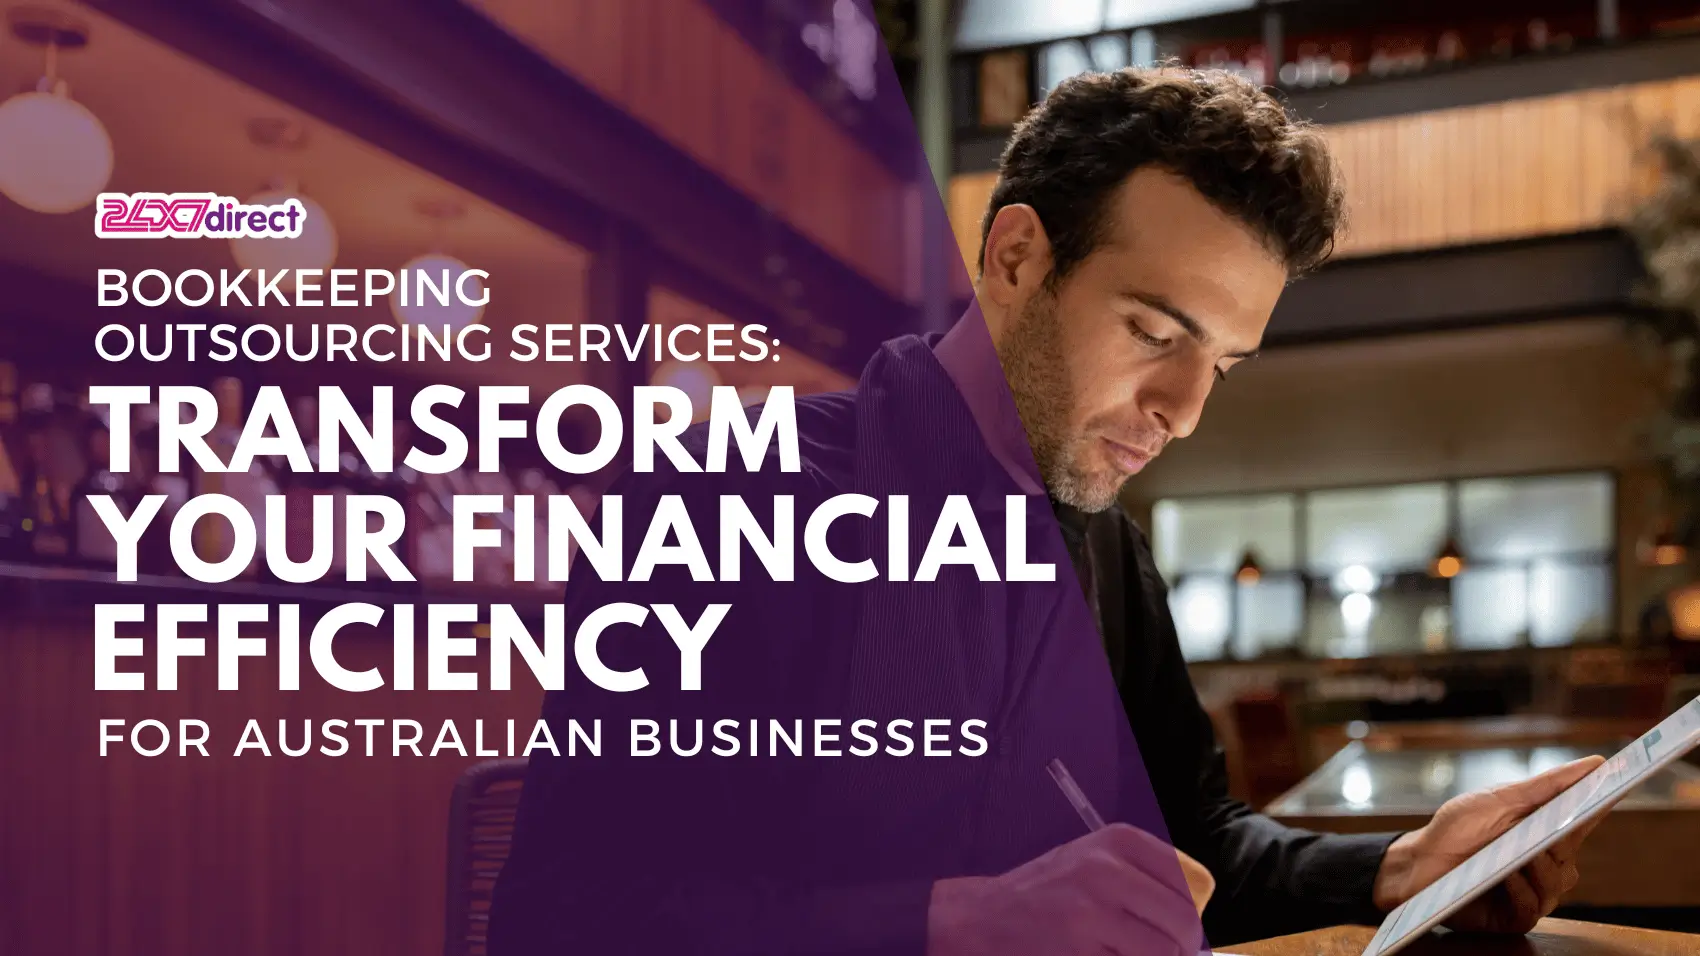 Bookkeeping Outsourcing Services Transform Your Financial Efficiency